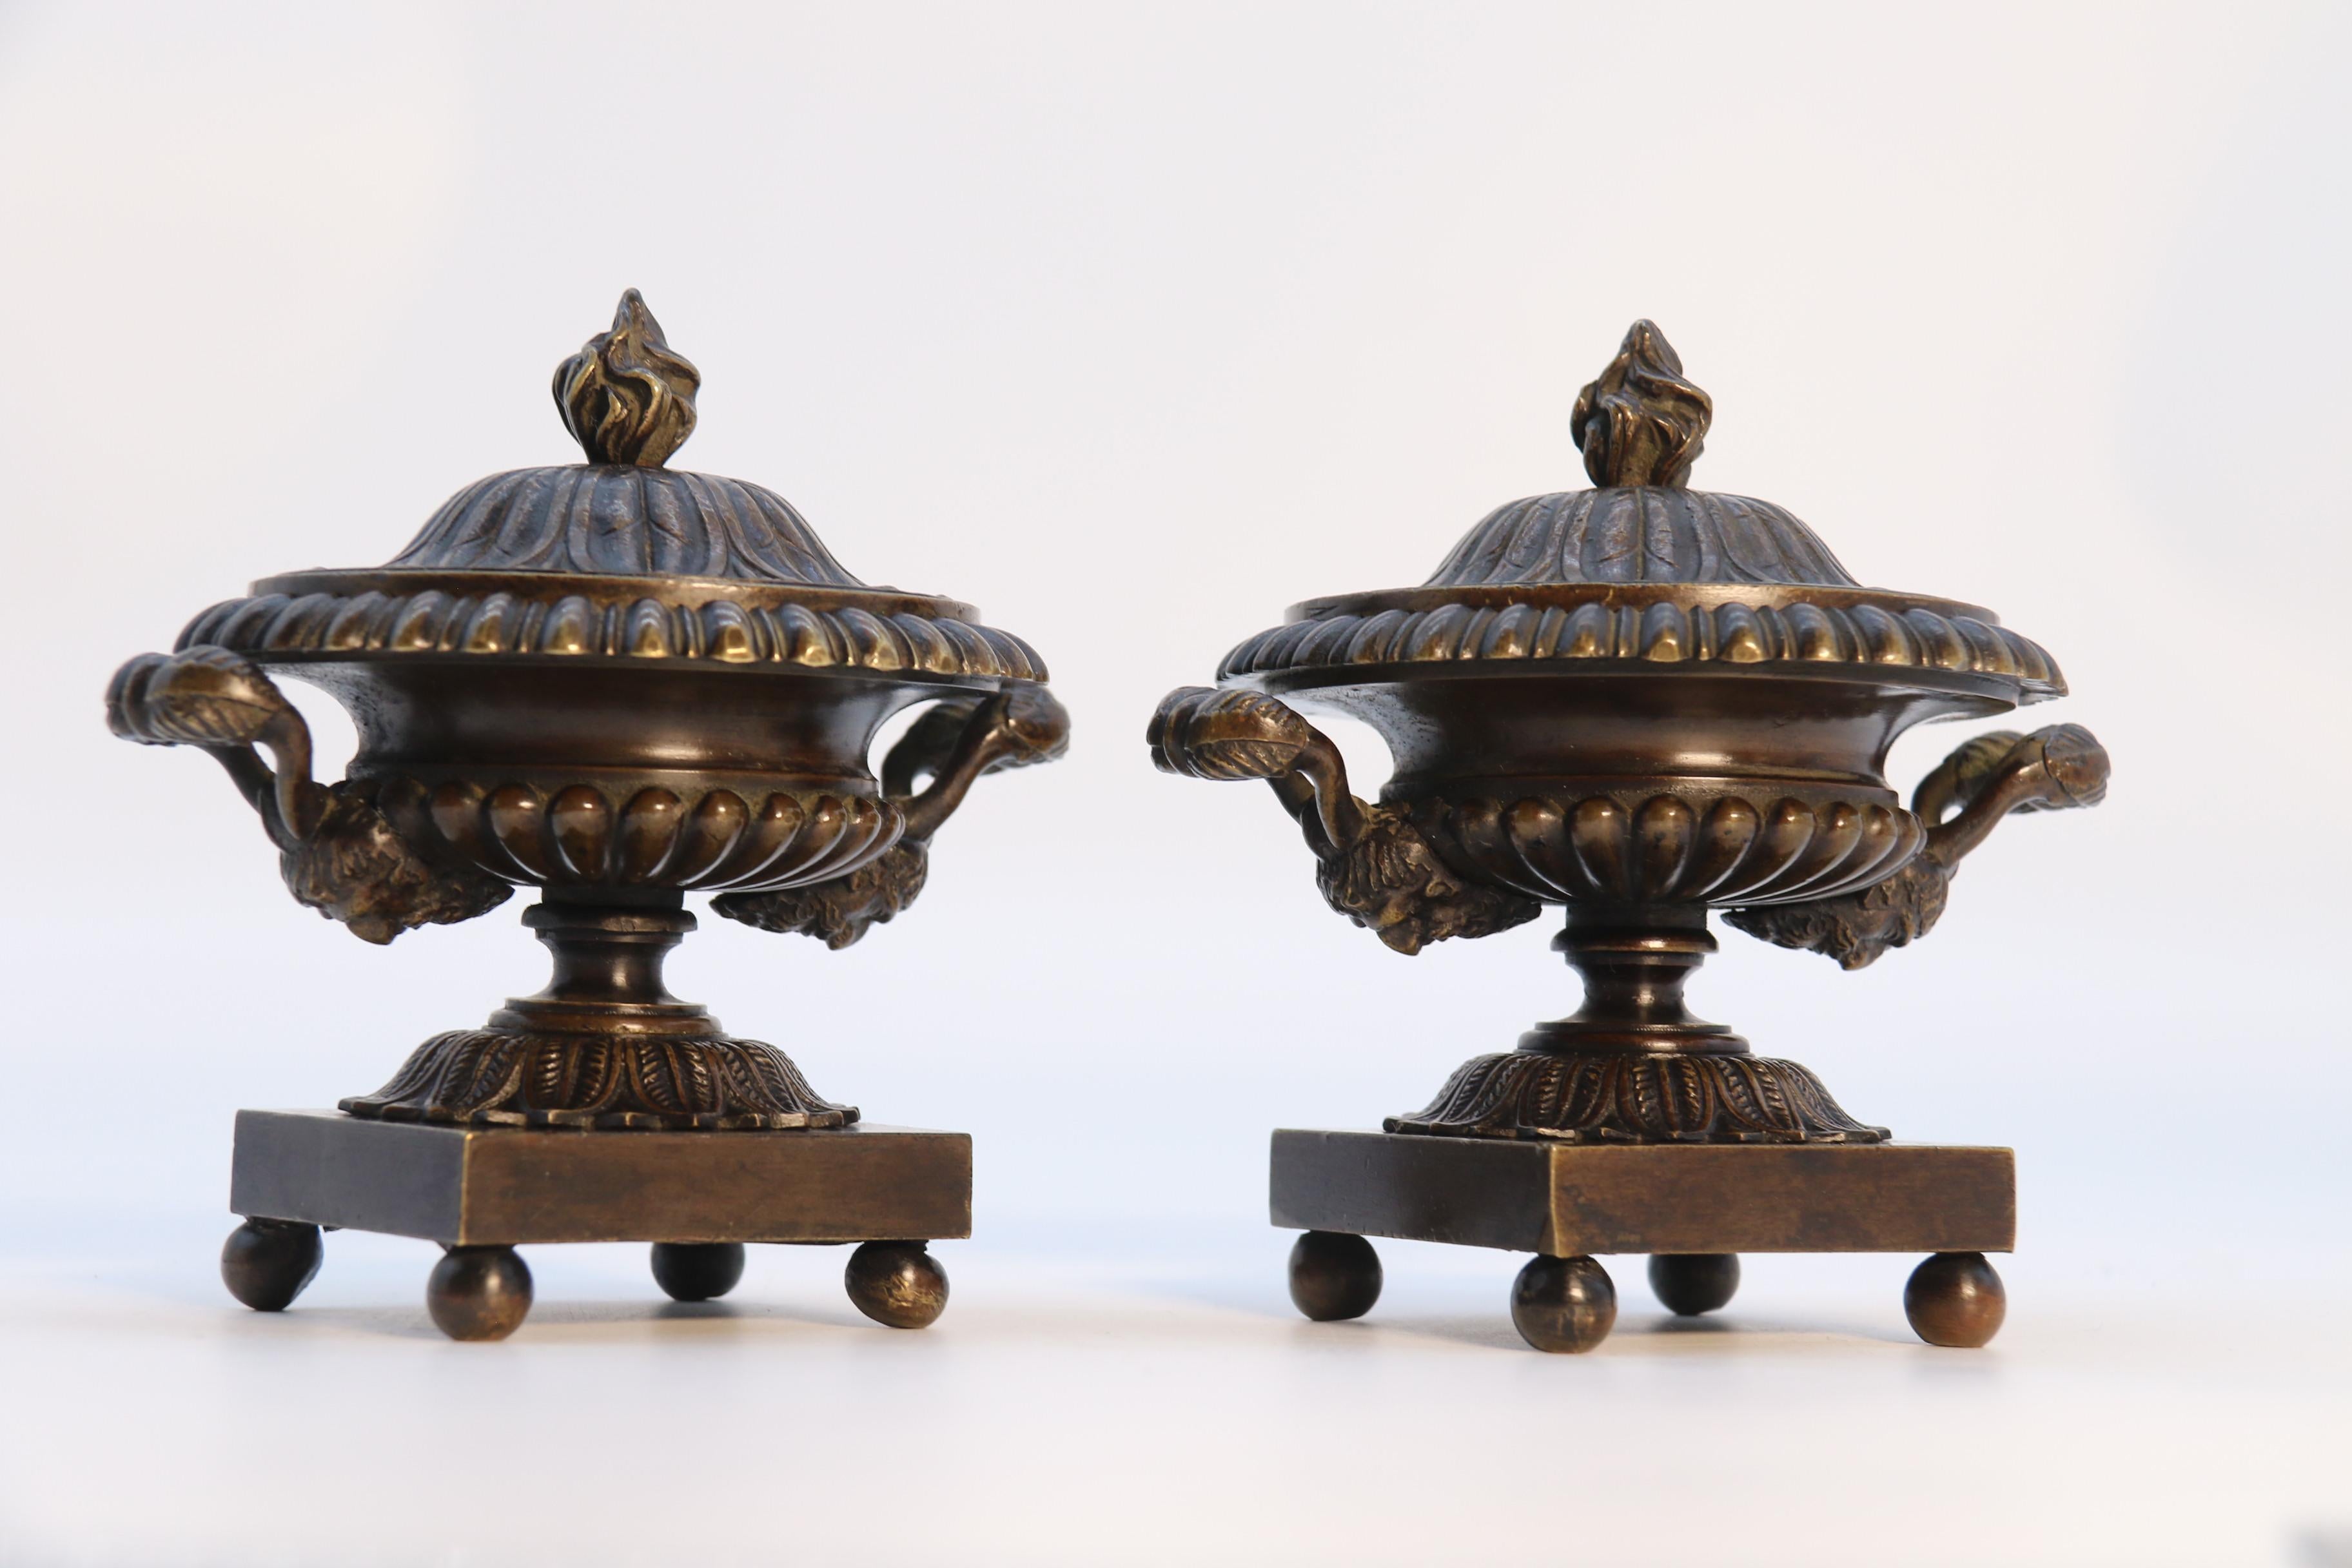 Antique  pair of English Regency period classical bronze urns,  circa 1820 For Sale 3